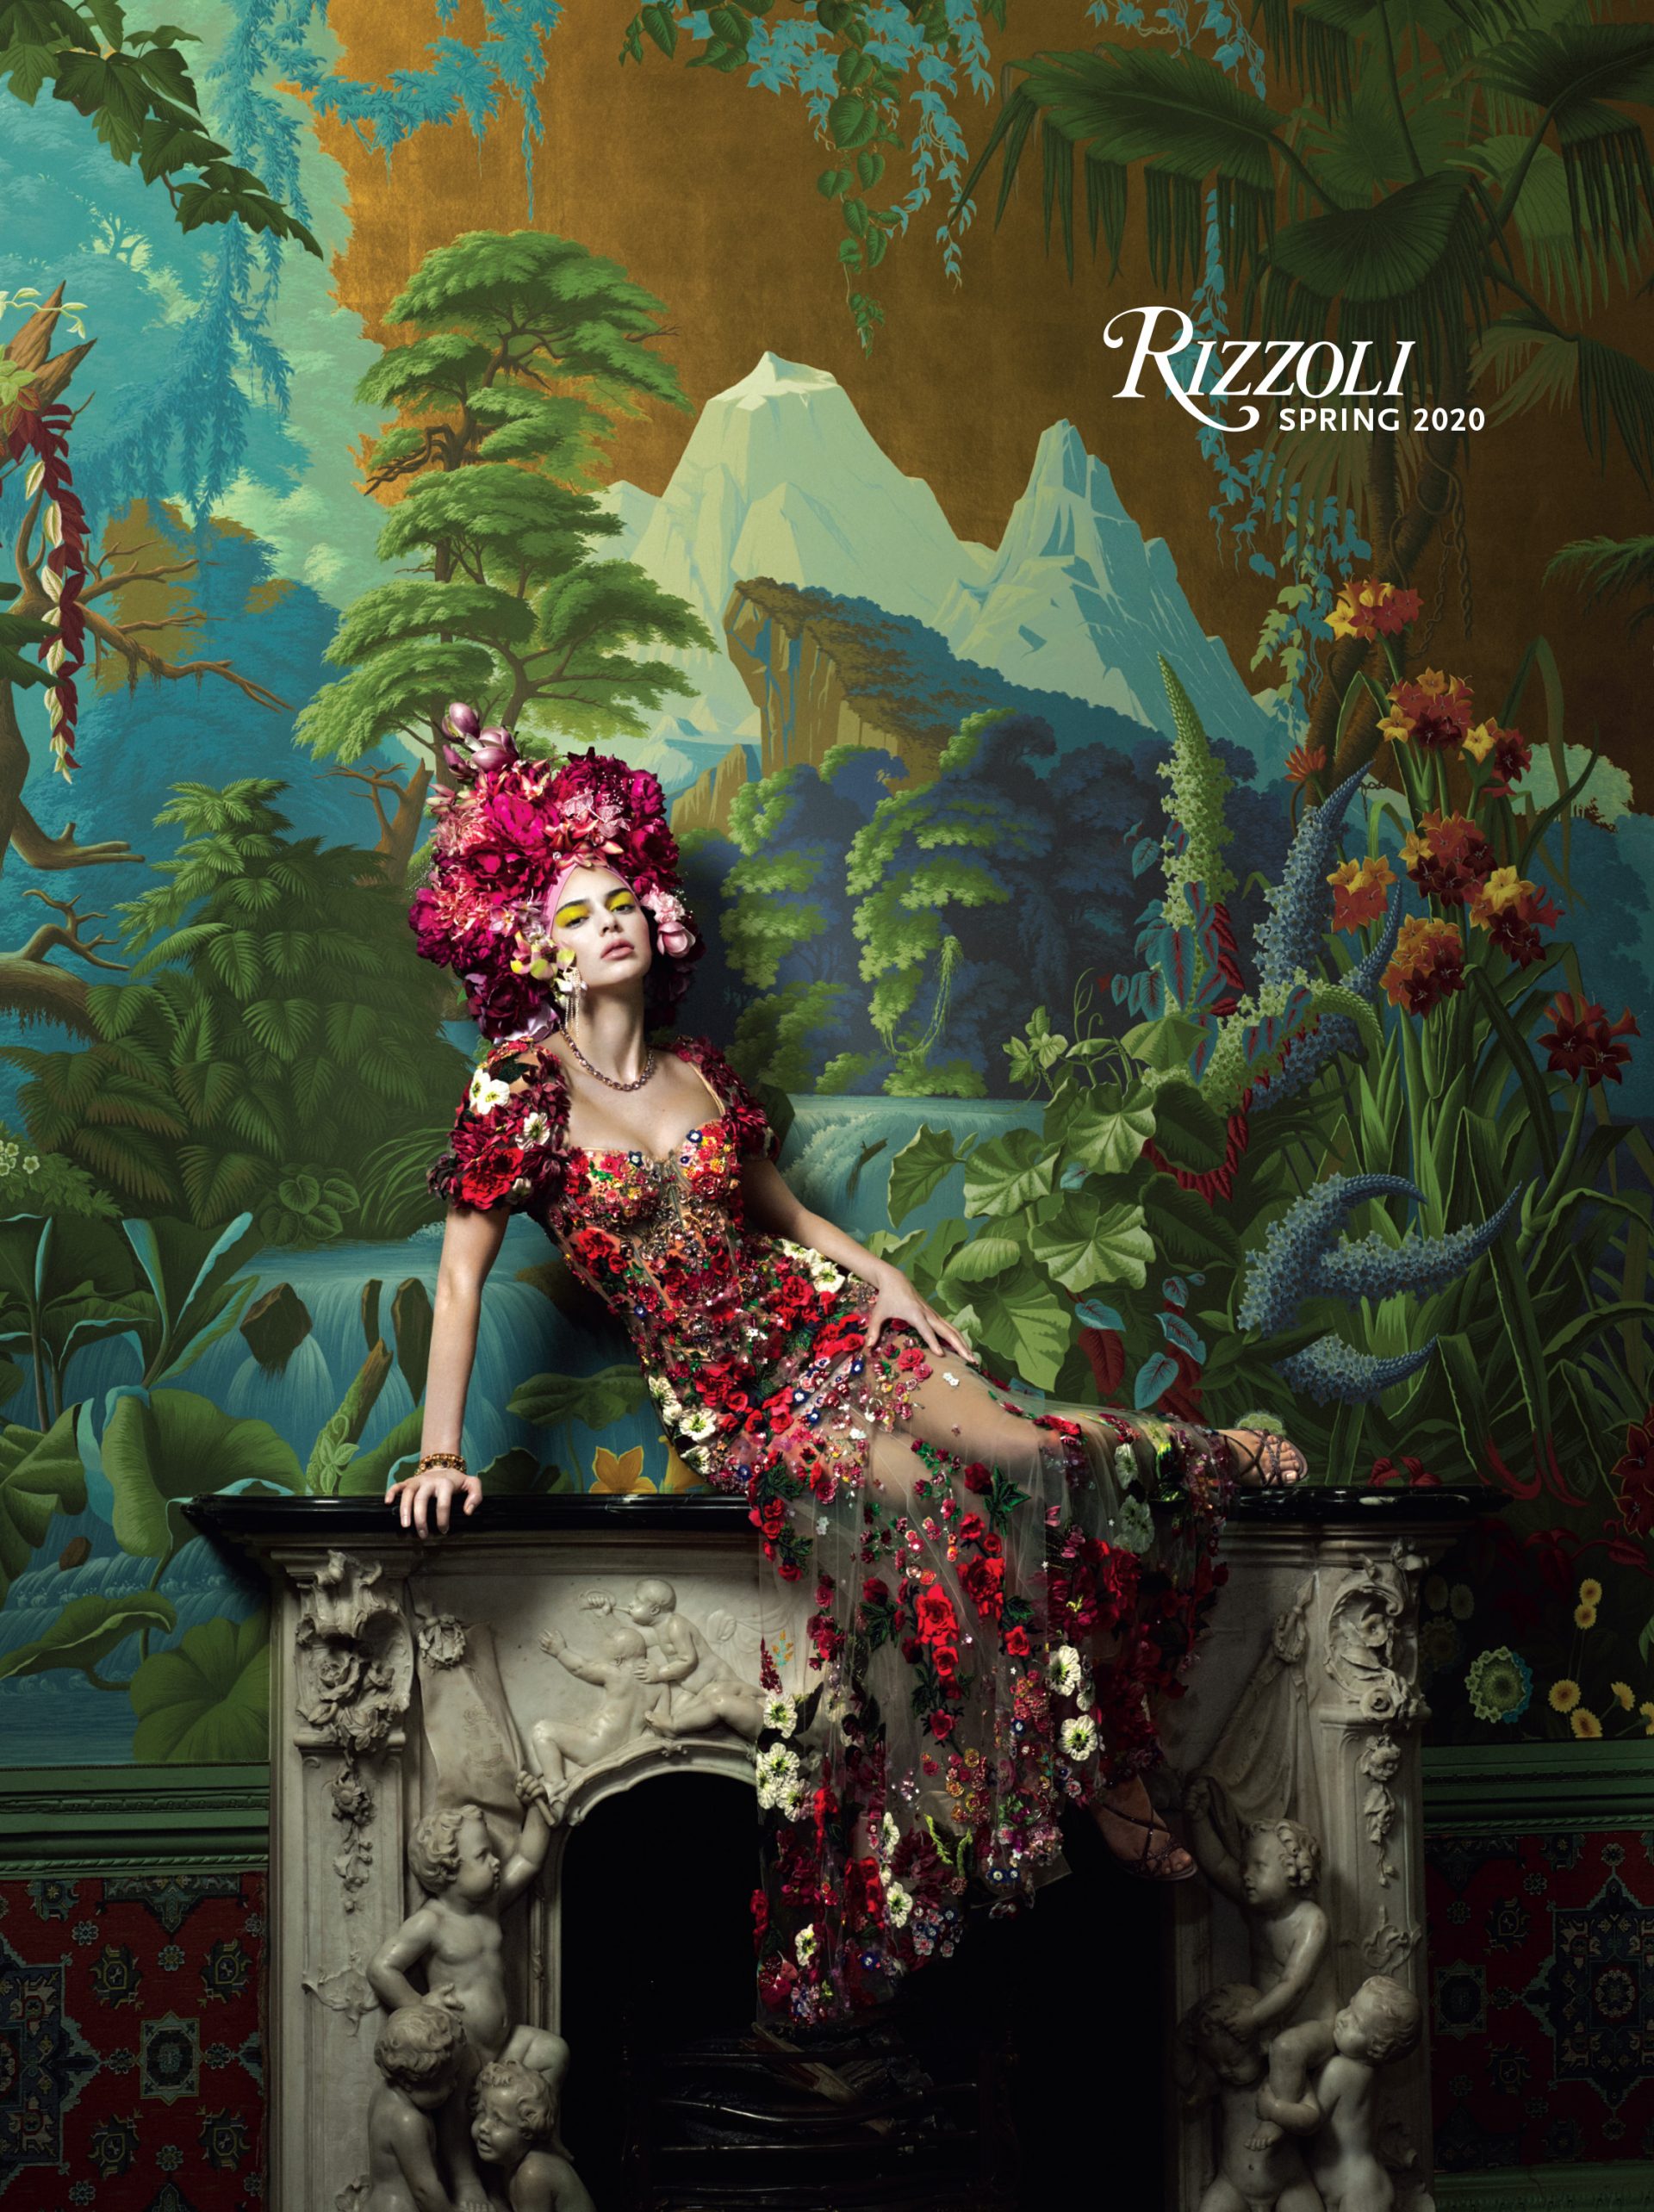 SP20 Rizzoli Catalog Front Cover 1920x2568 